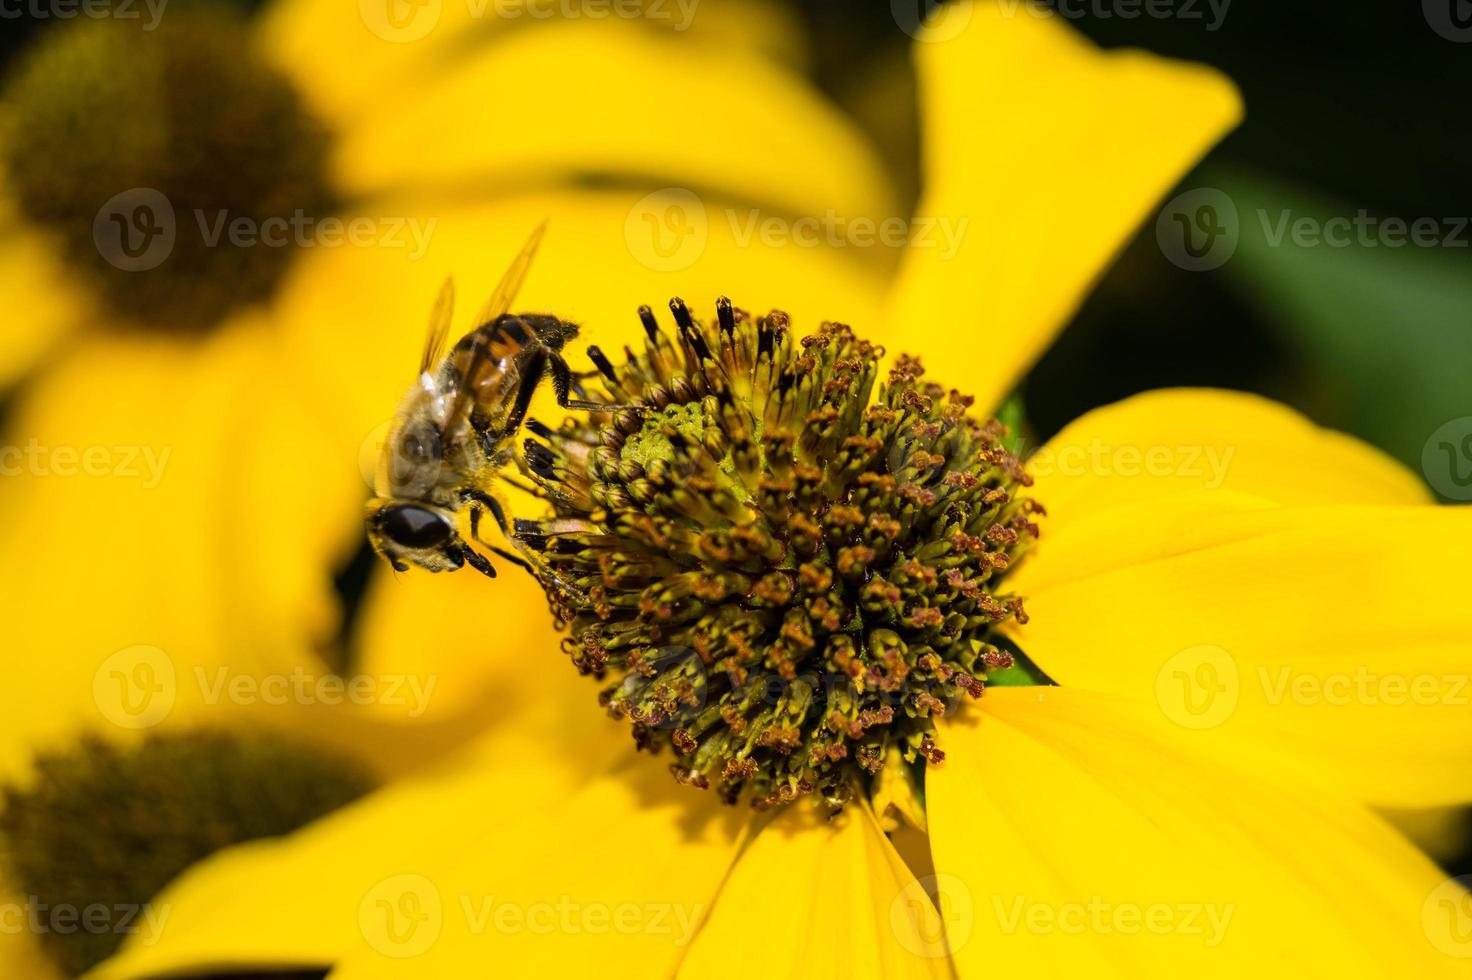 The insects collect pollen in the garden photo